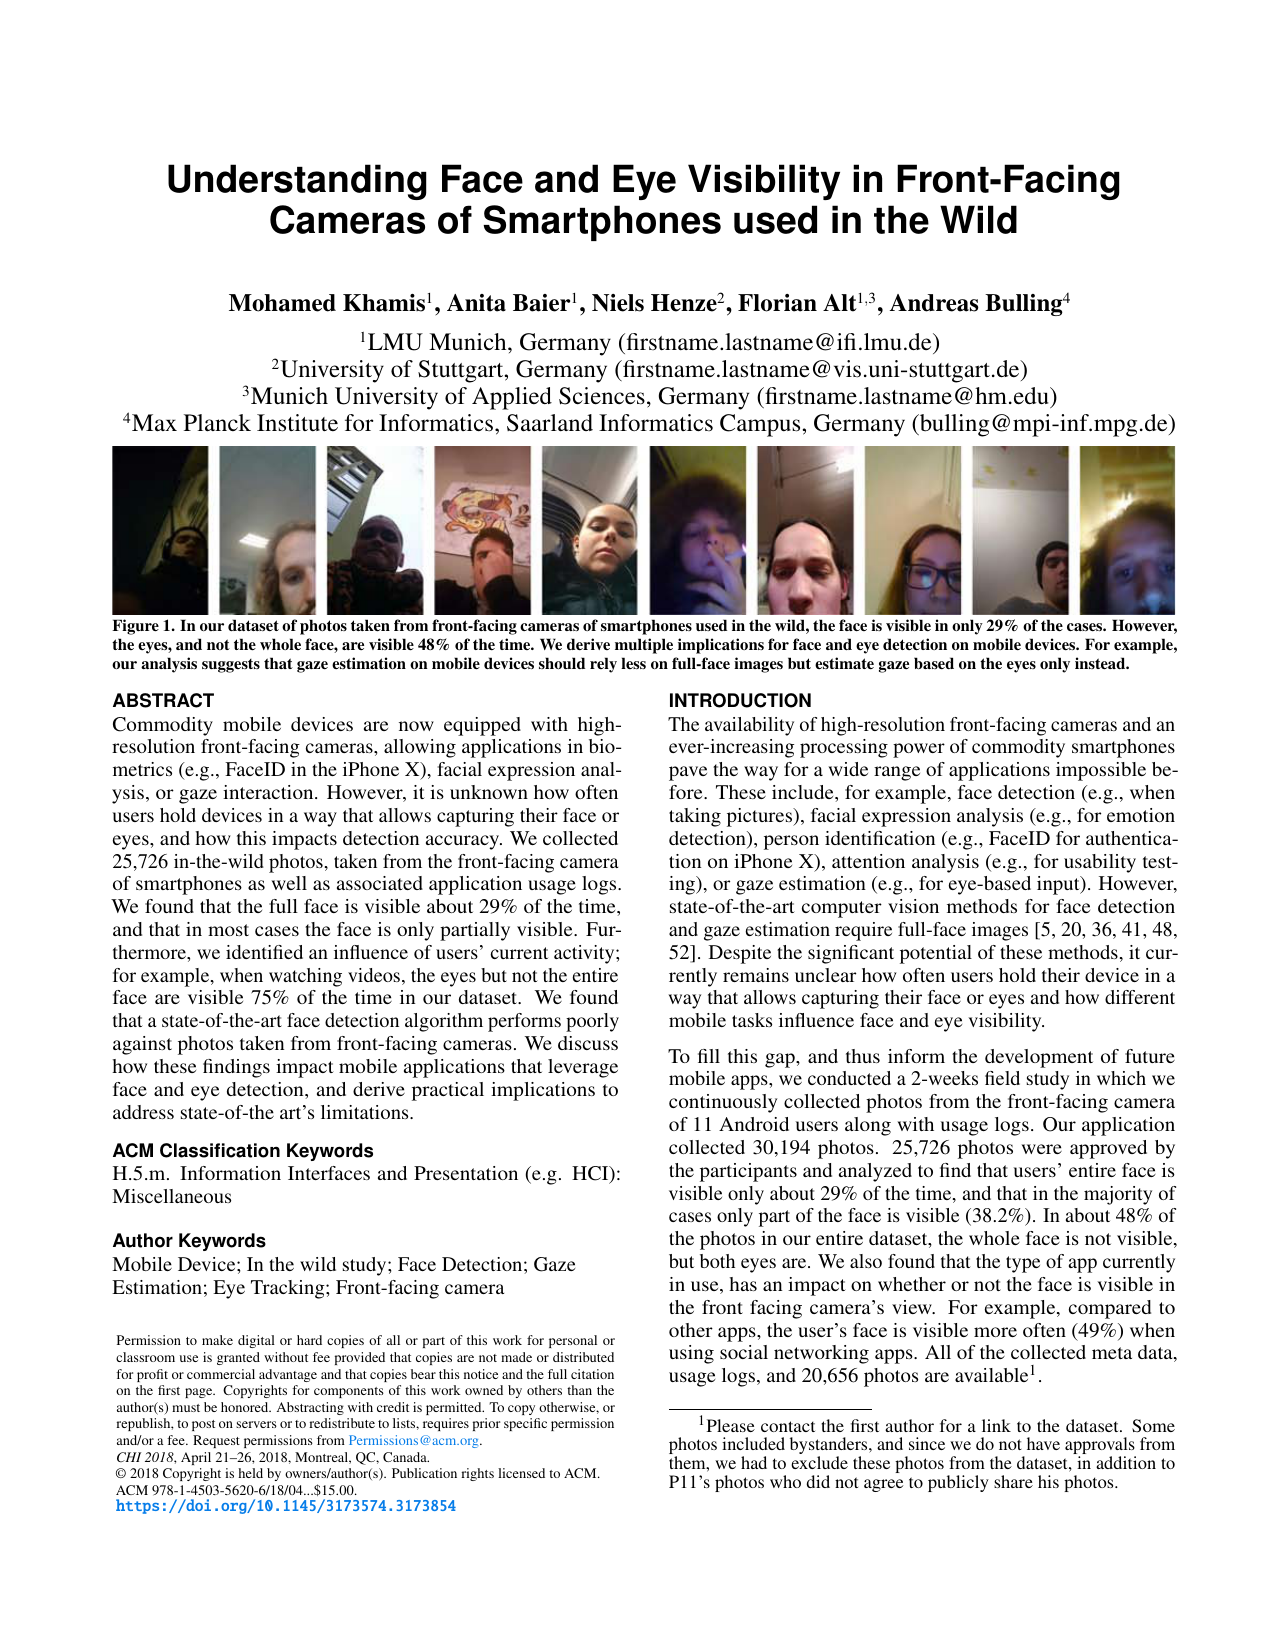 Understanding Face and Eye Visibility in Front-Facing Cameras of Smartphones used in the Wild